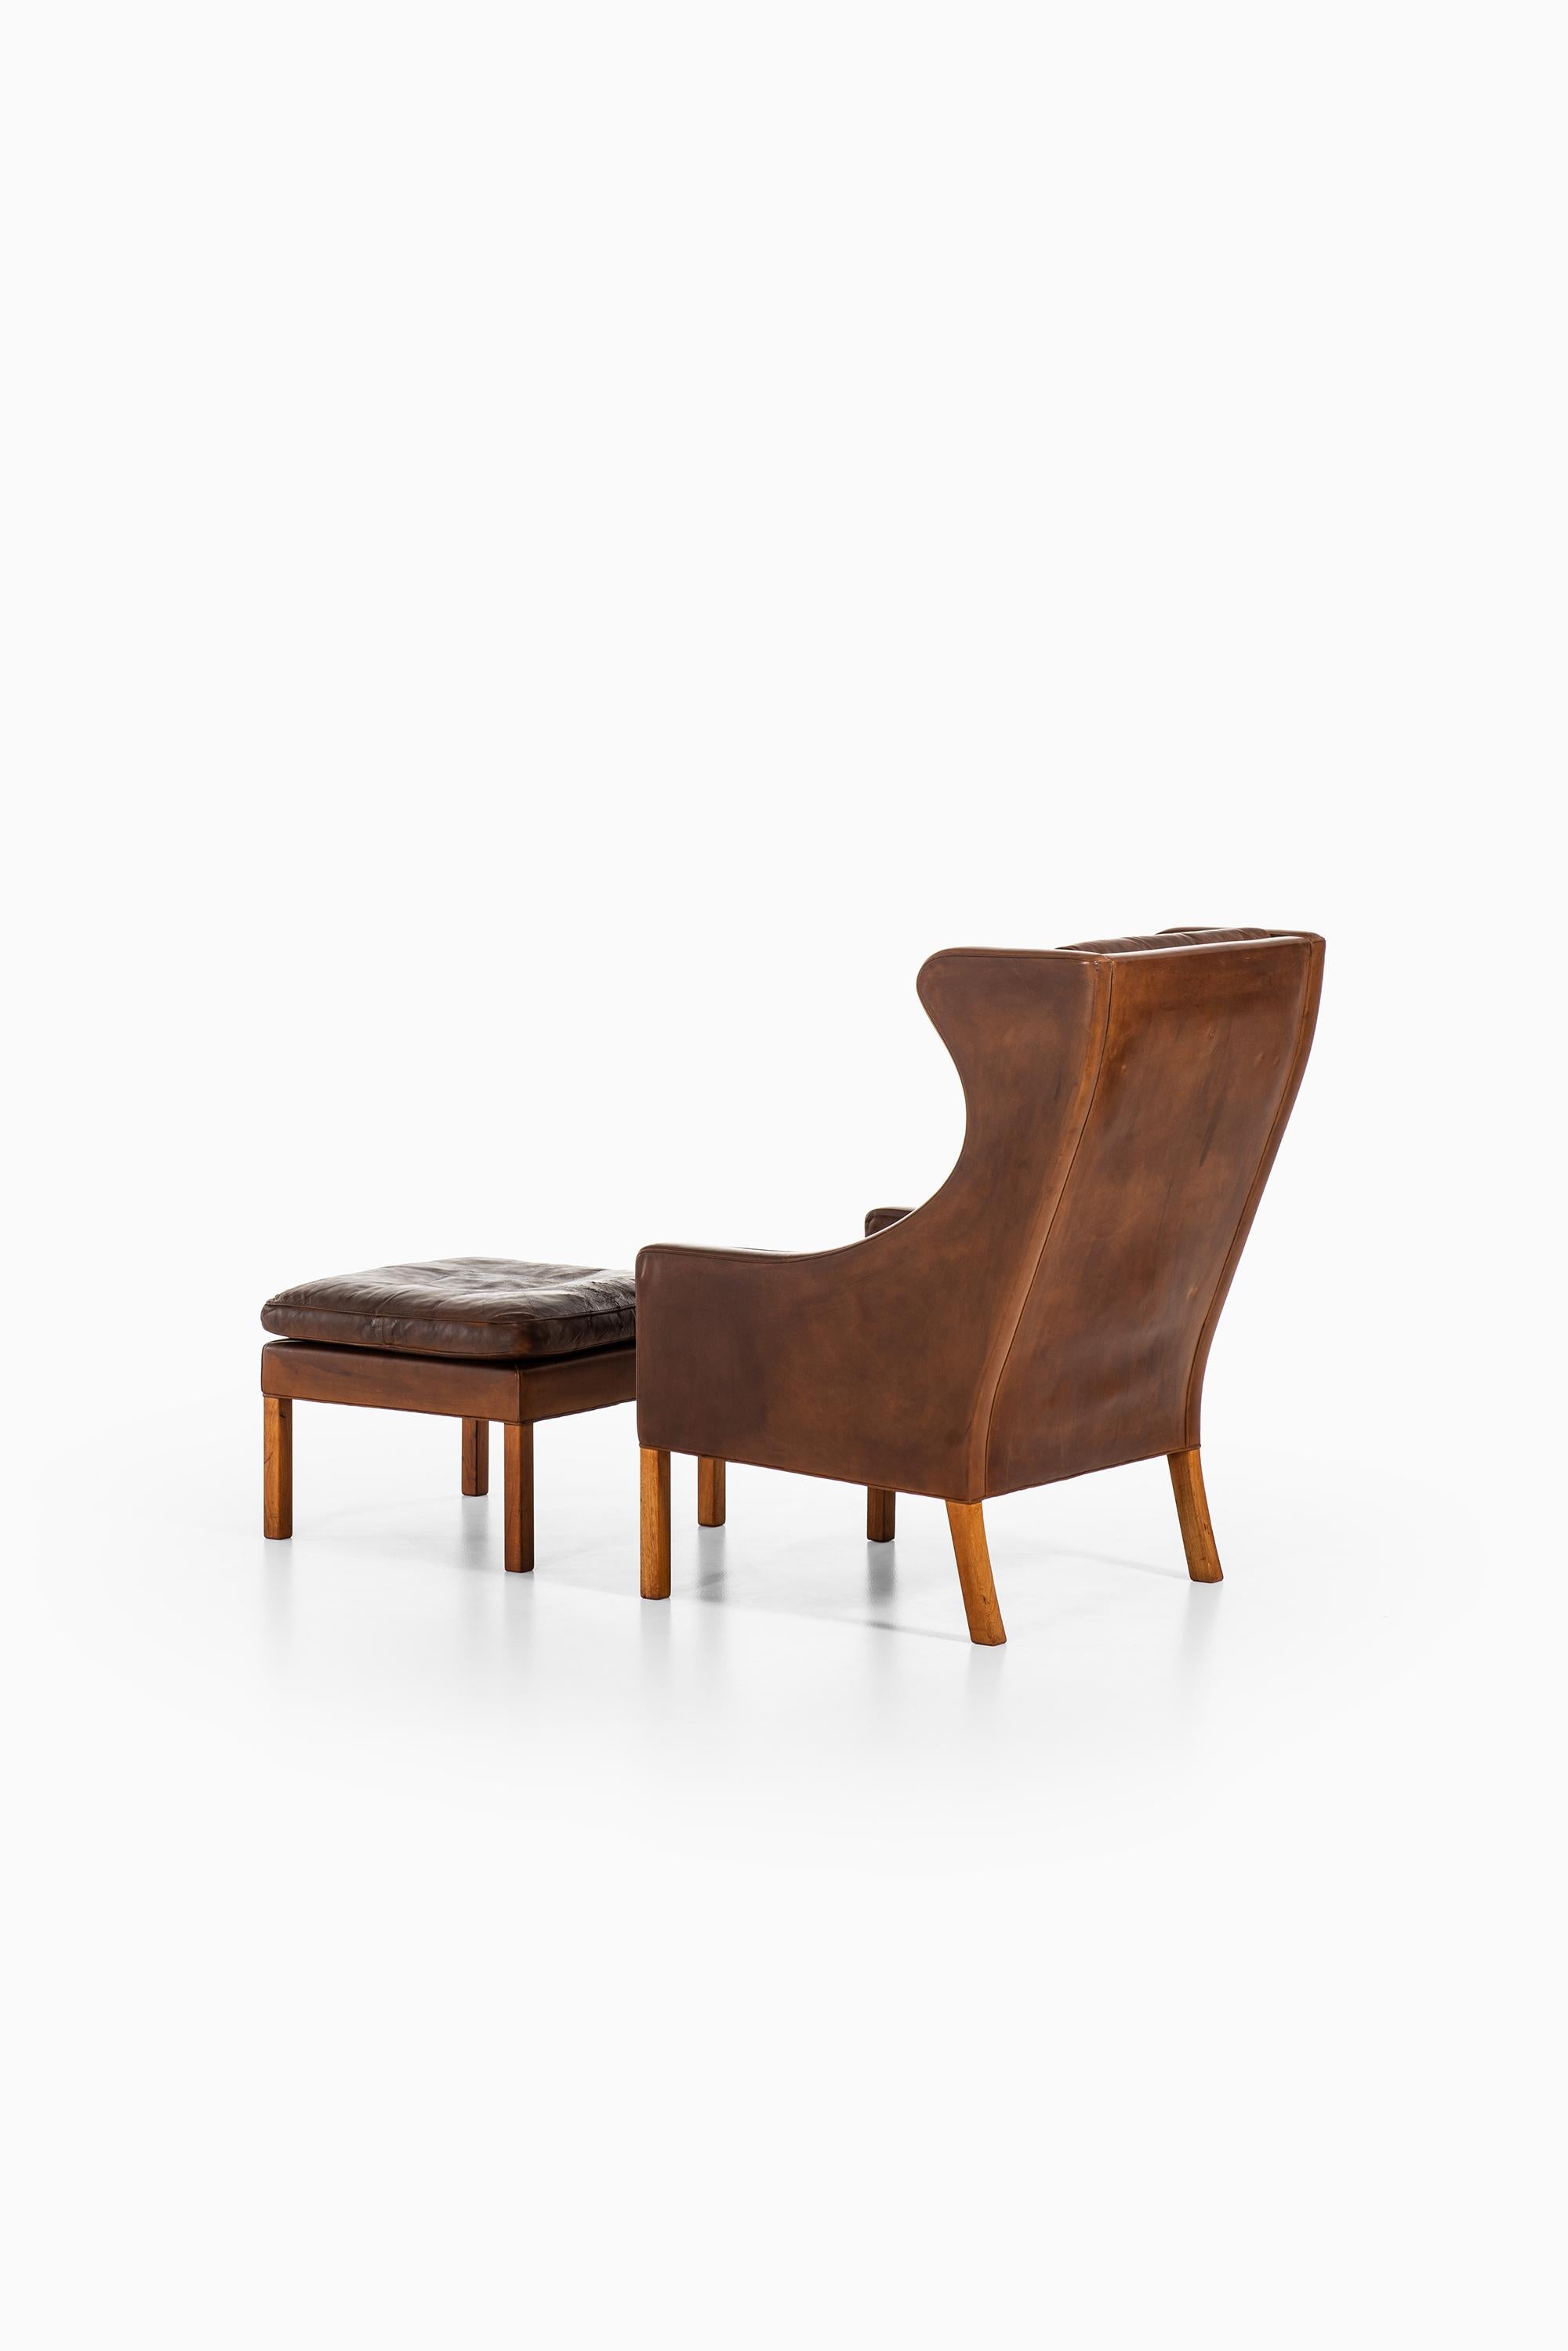 Mid-20th Century Børge Mogensen Wingback Easy Chair Model 2204 by Fredericia Stolefabrik